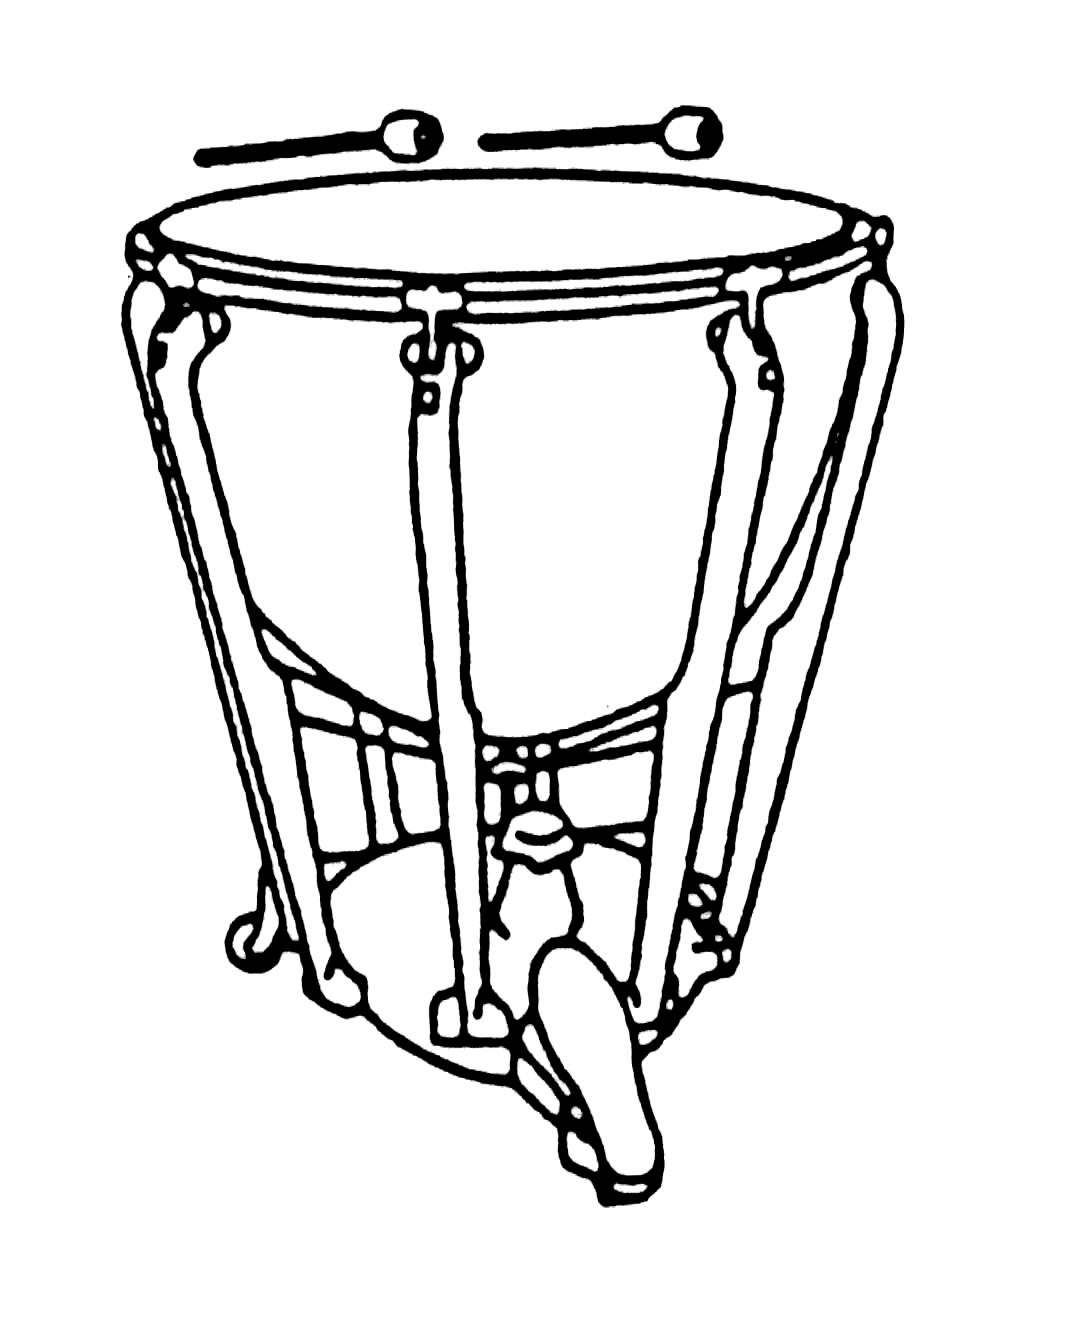 Free coloring pages of drum set clip art